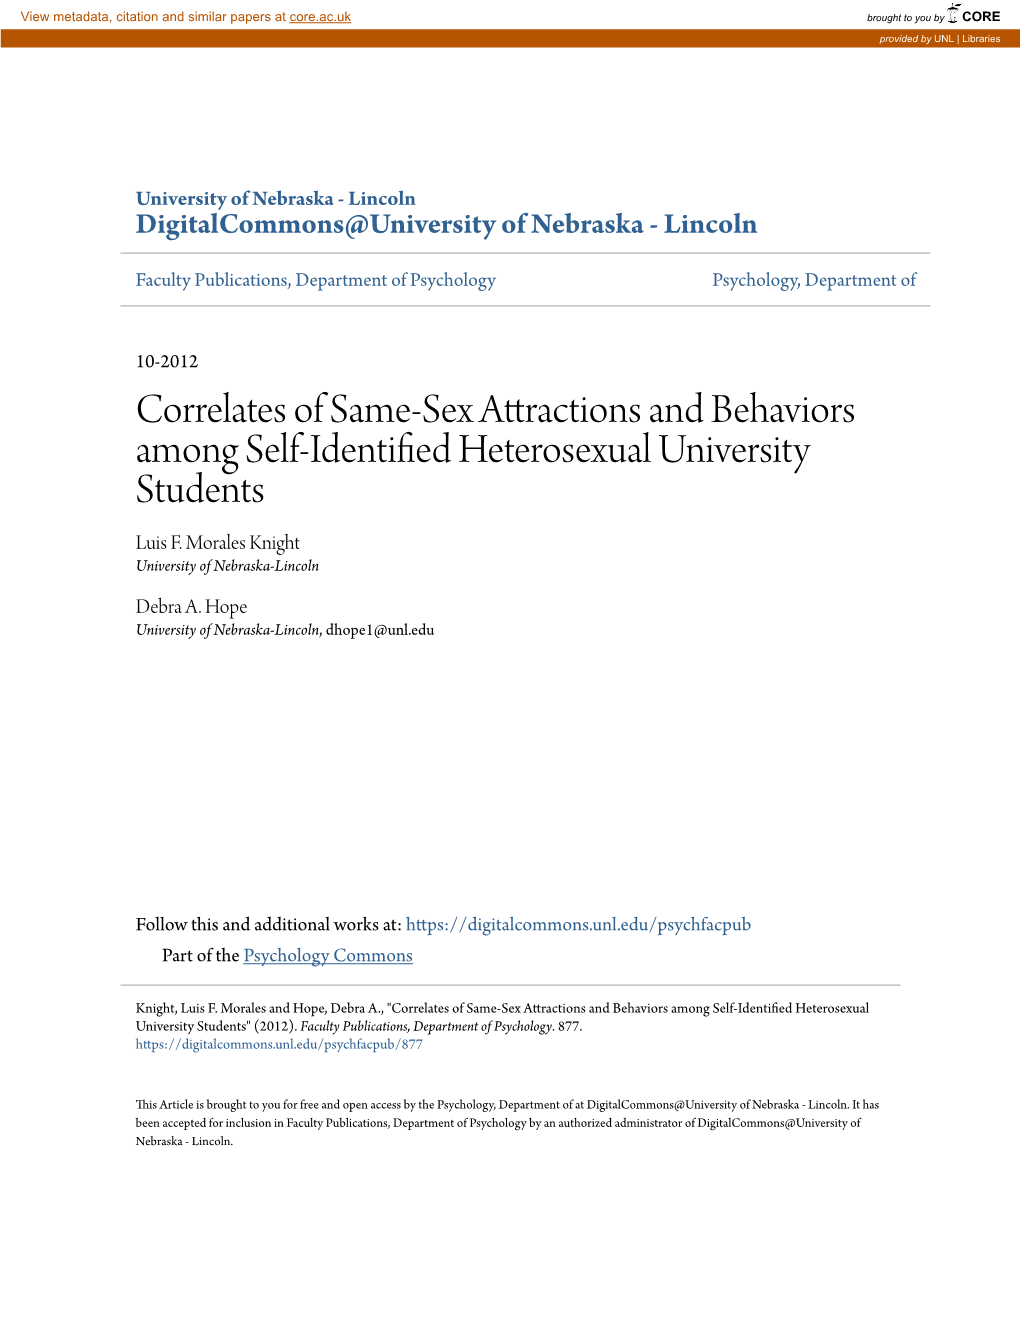 Correlates of Same-Sex Attractions and Behaviors Among Self-Identified Eth Erosexual University Students Luis F